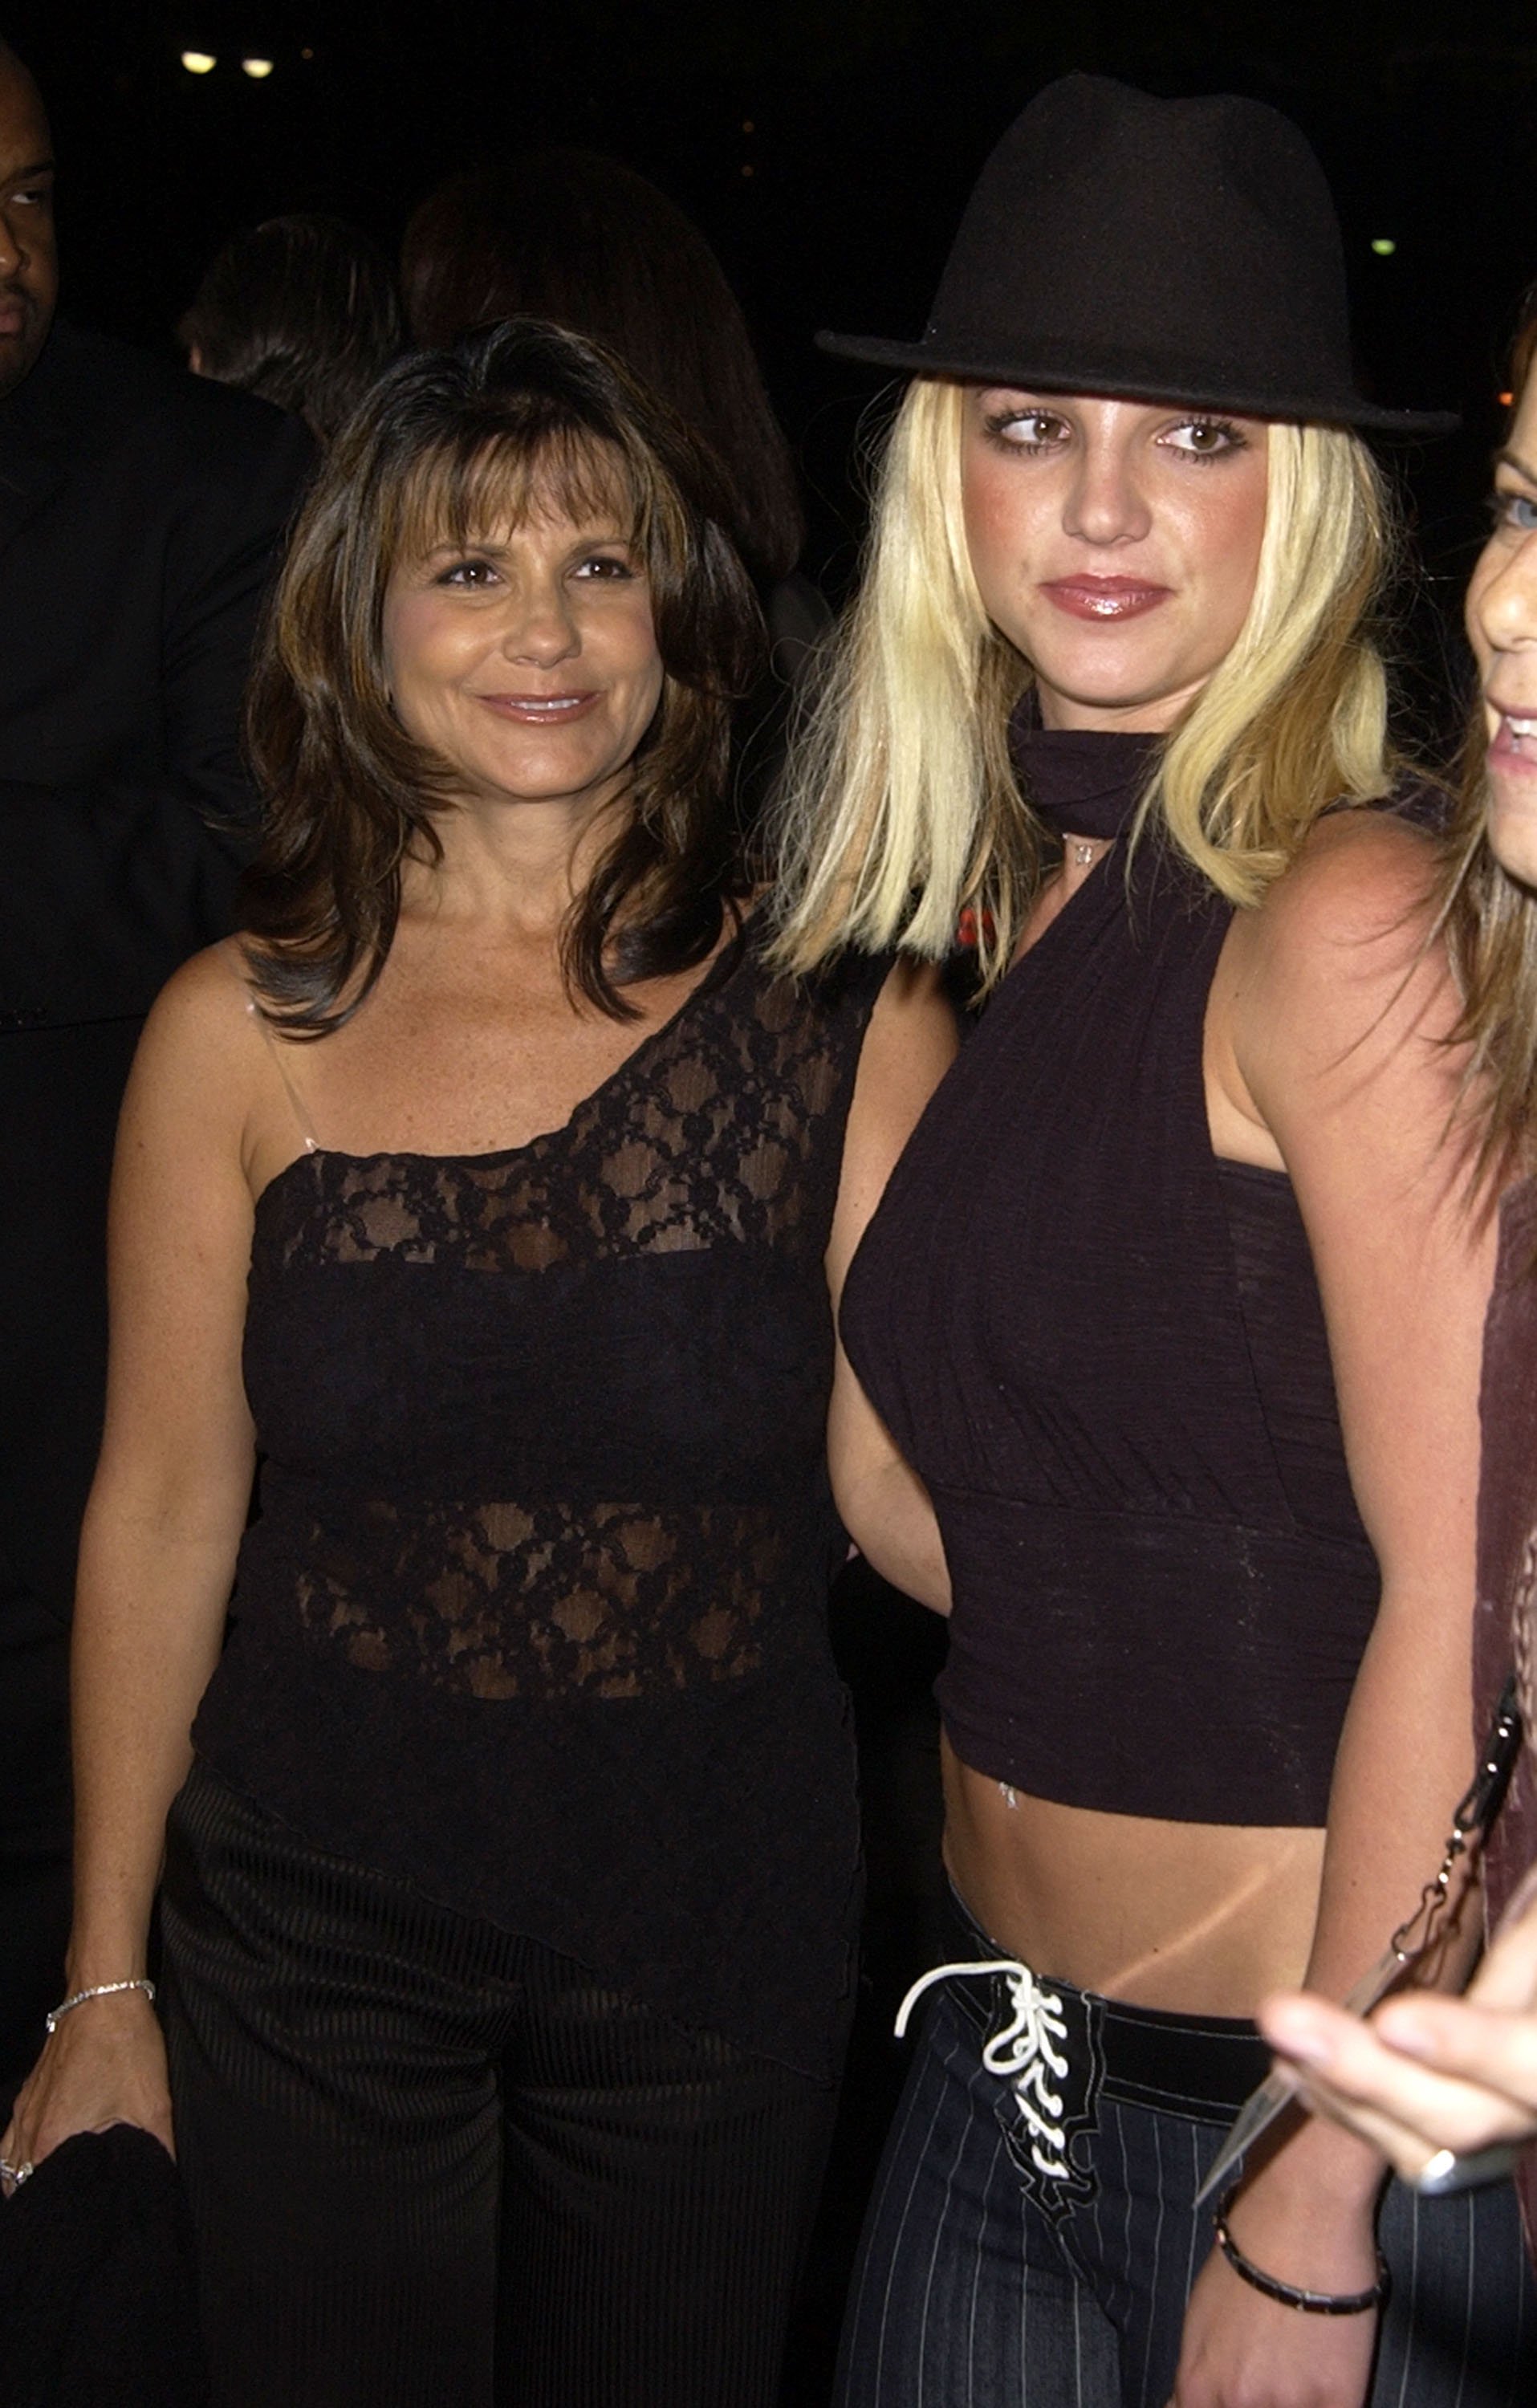 Britney Spears and her mother Lynne Spears attend "The Four Feathers" Premiere in Westwood, California, on September 17, 2002.  | Source: Getty Images